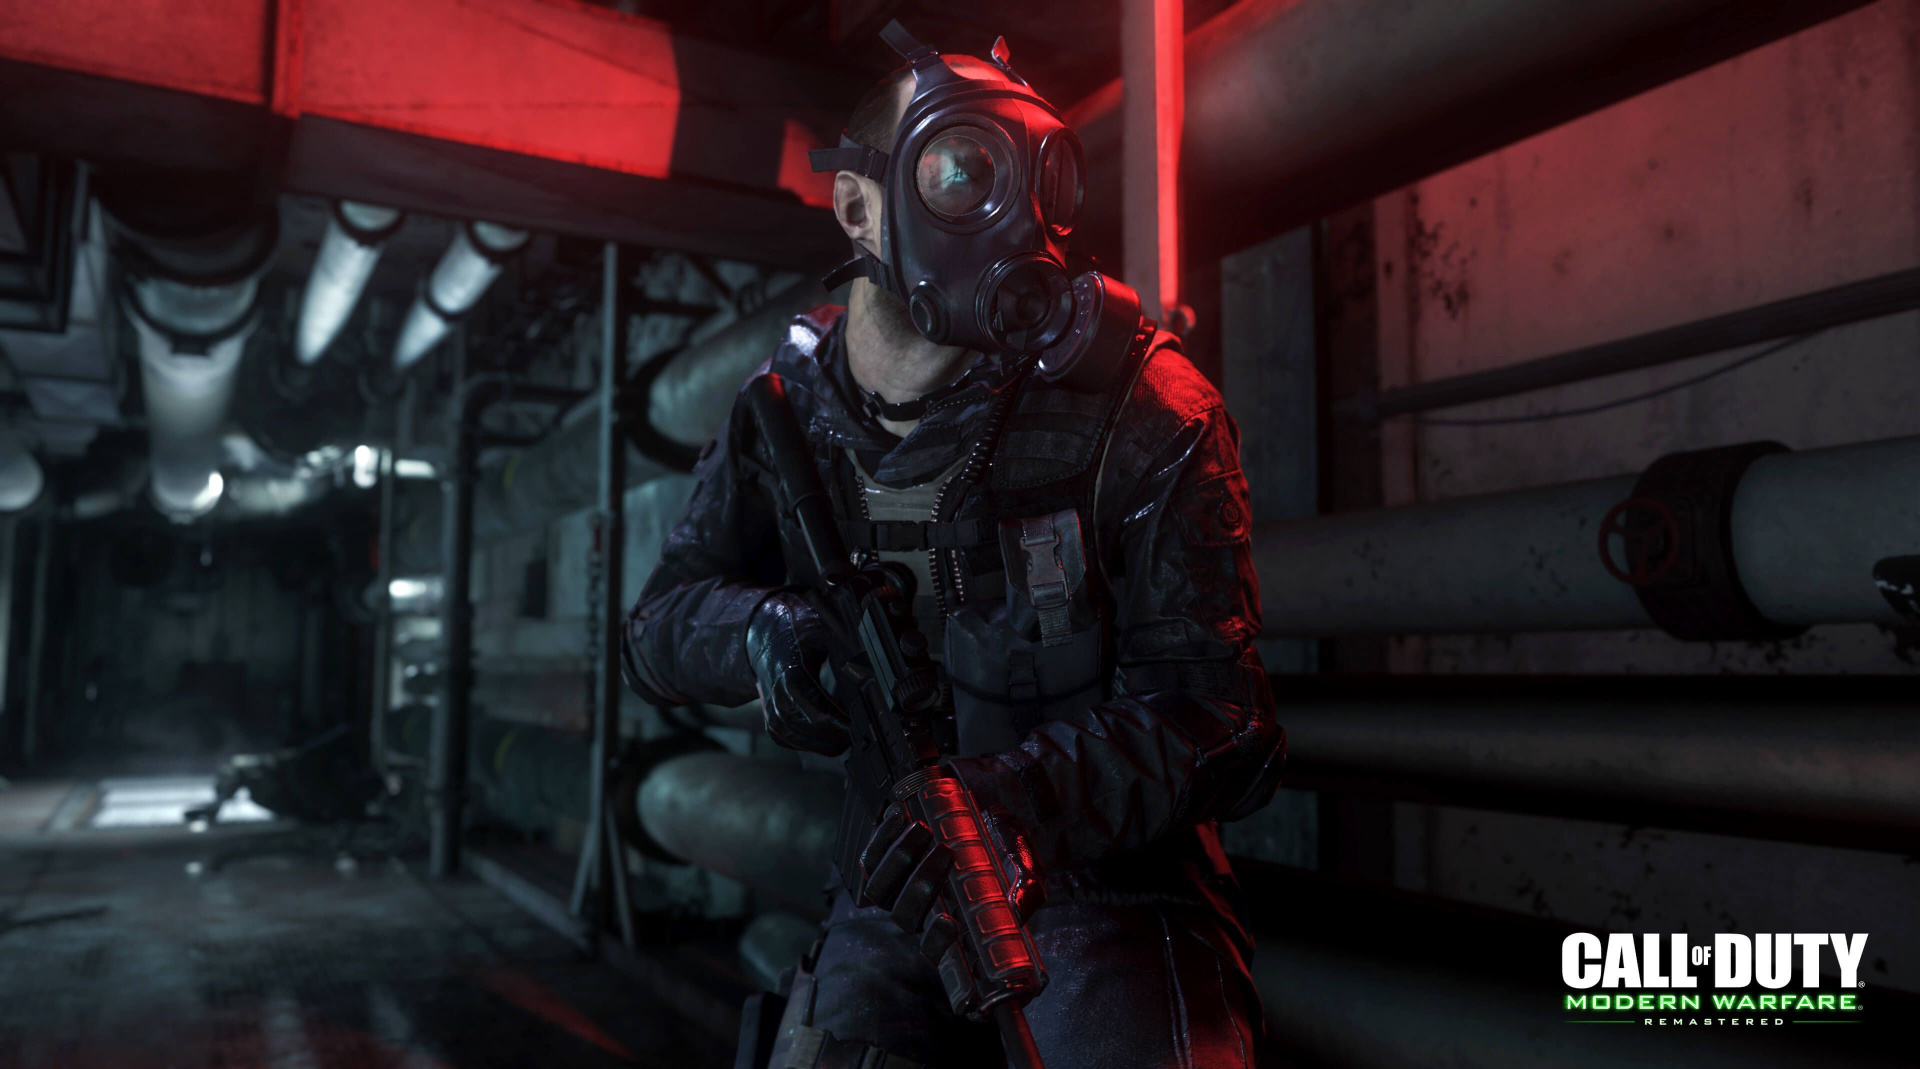 Why Call of Duty: Modern Warfare is getting the remaster treatment